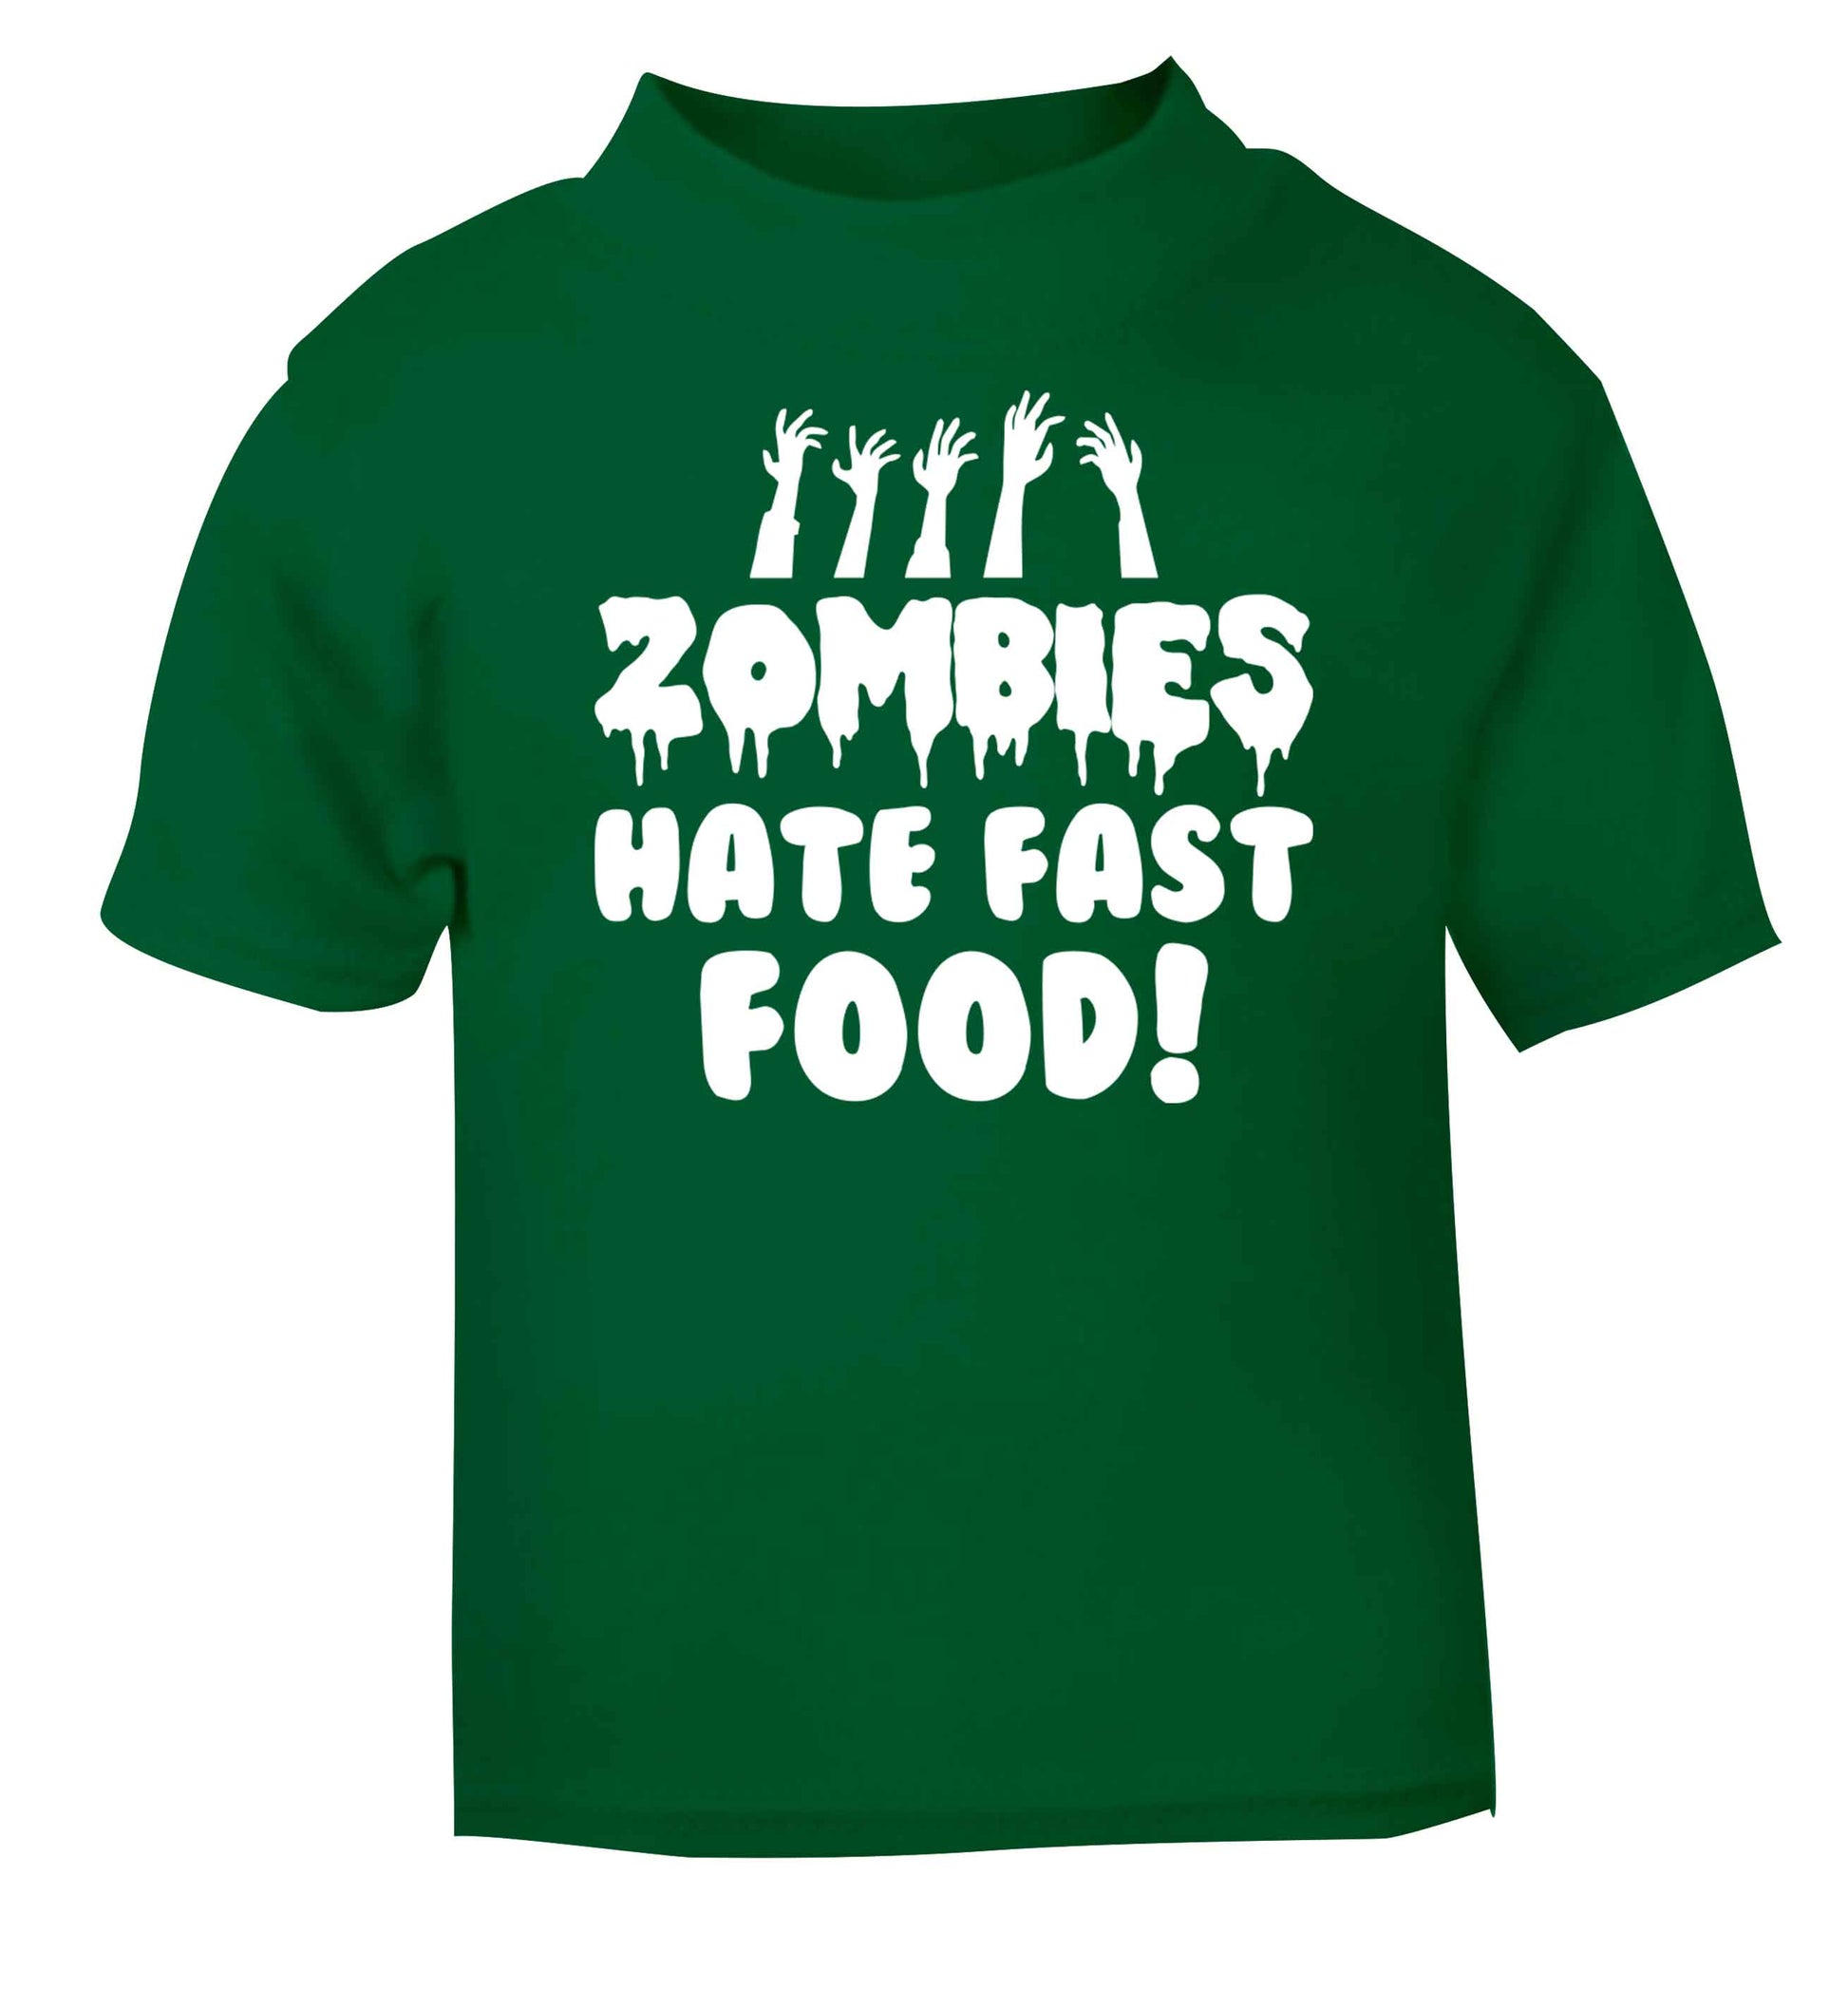 Zombies hate fast food green baby toddler Tshirt 2 Years